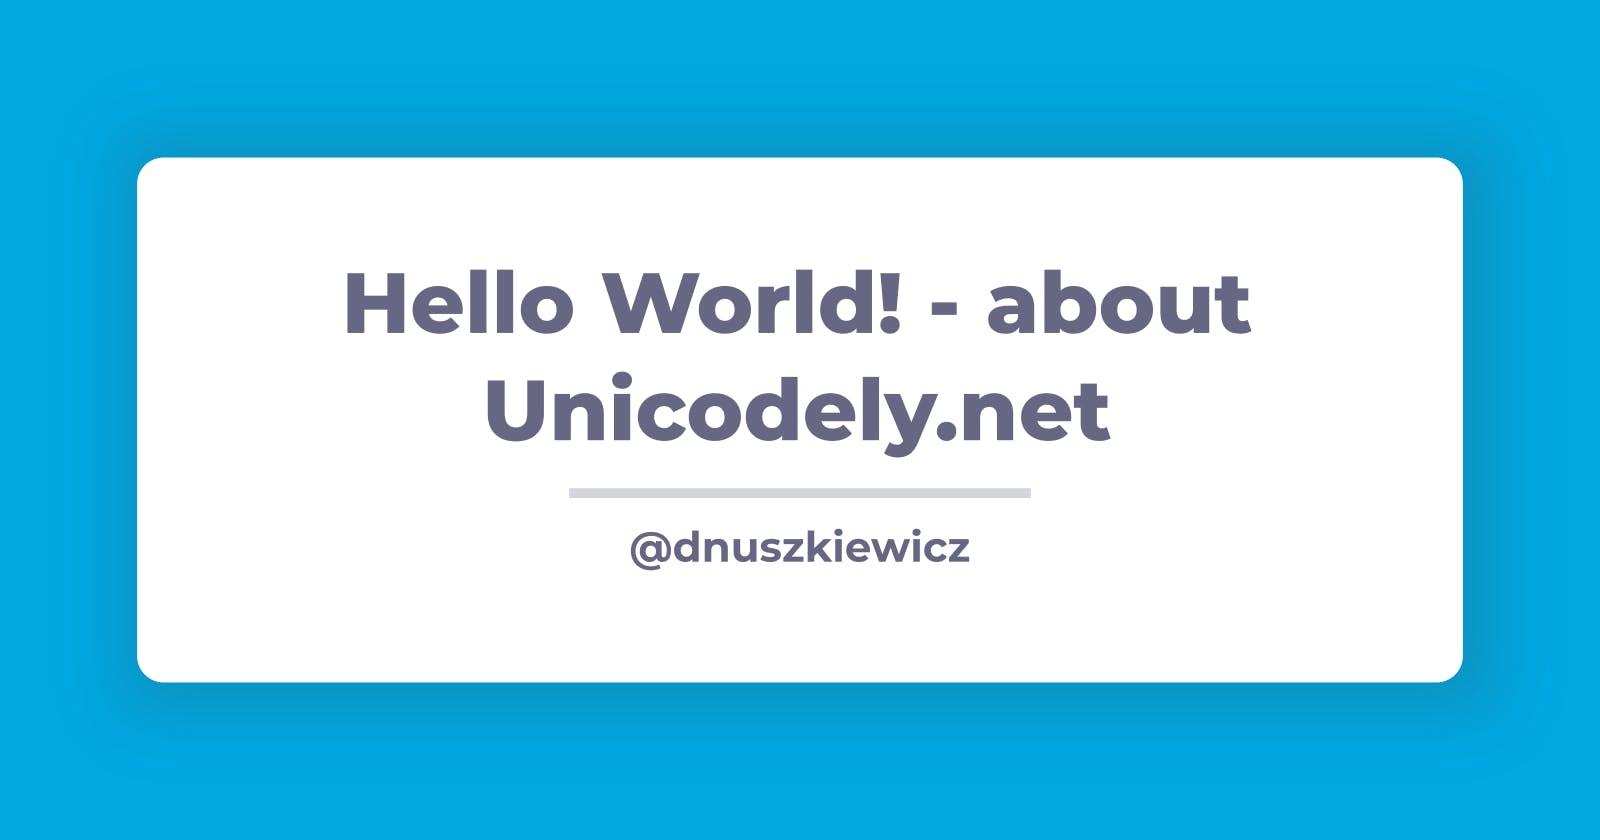 Hello world! - about this blog